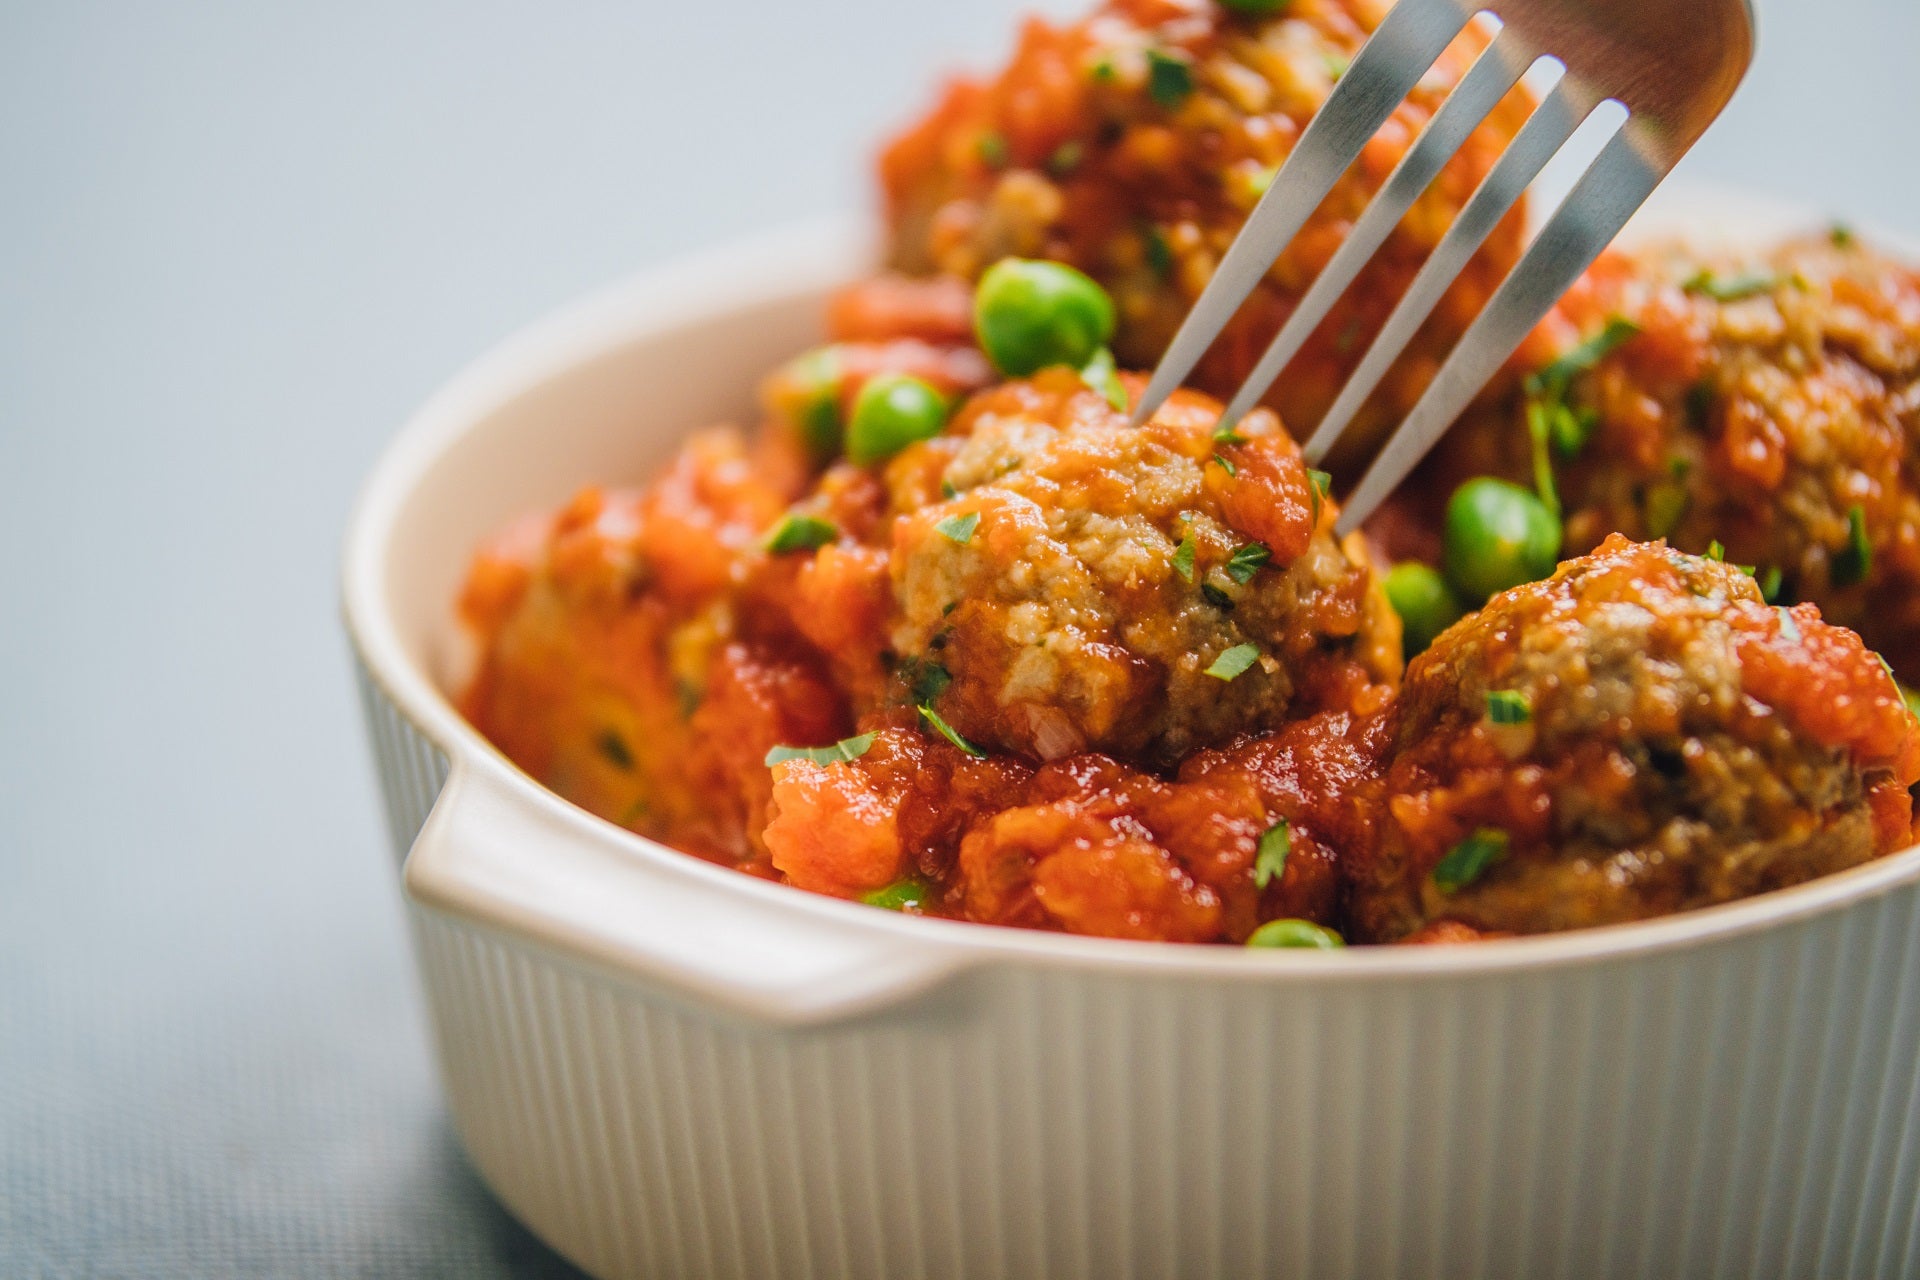 Meatballs with Tomato and Chipotle